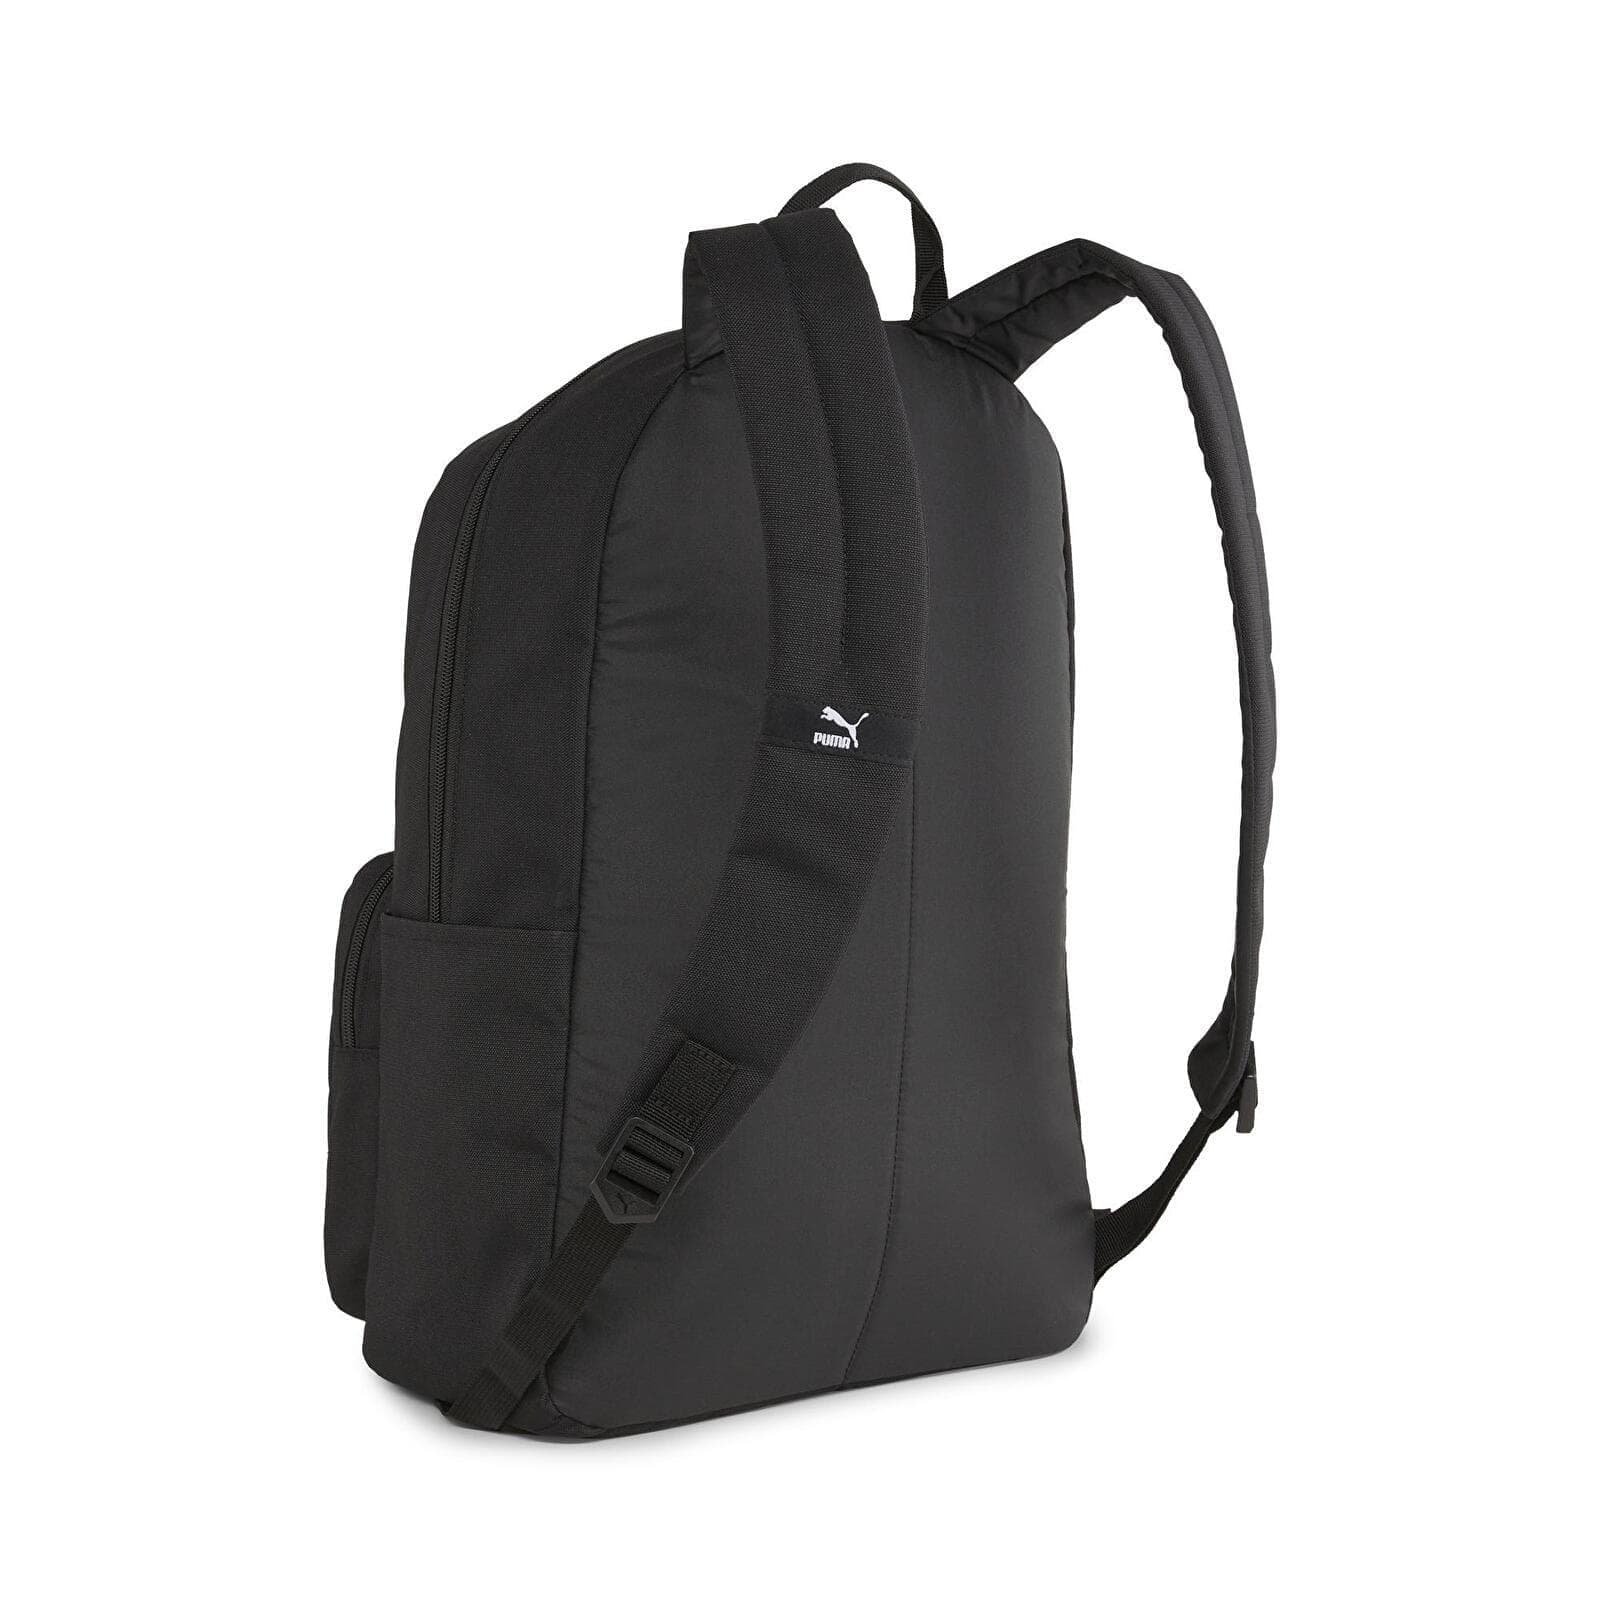 Backpack Classics Archive Backpack Black, Universal